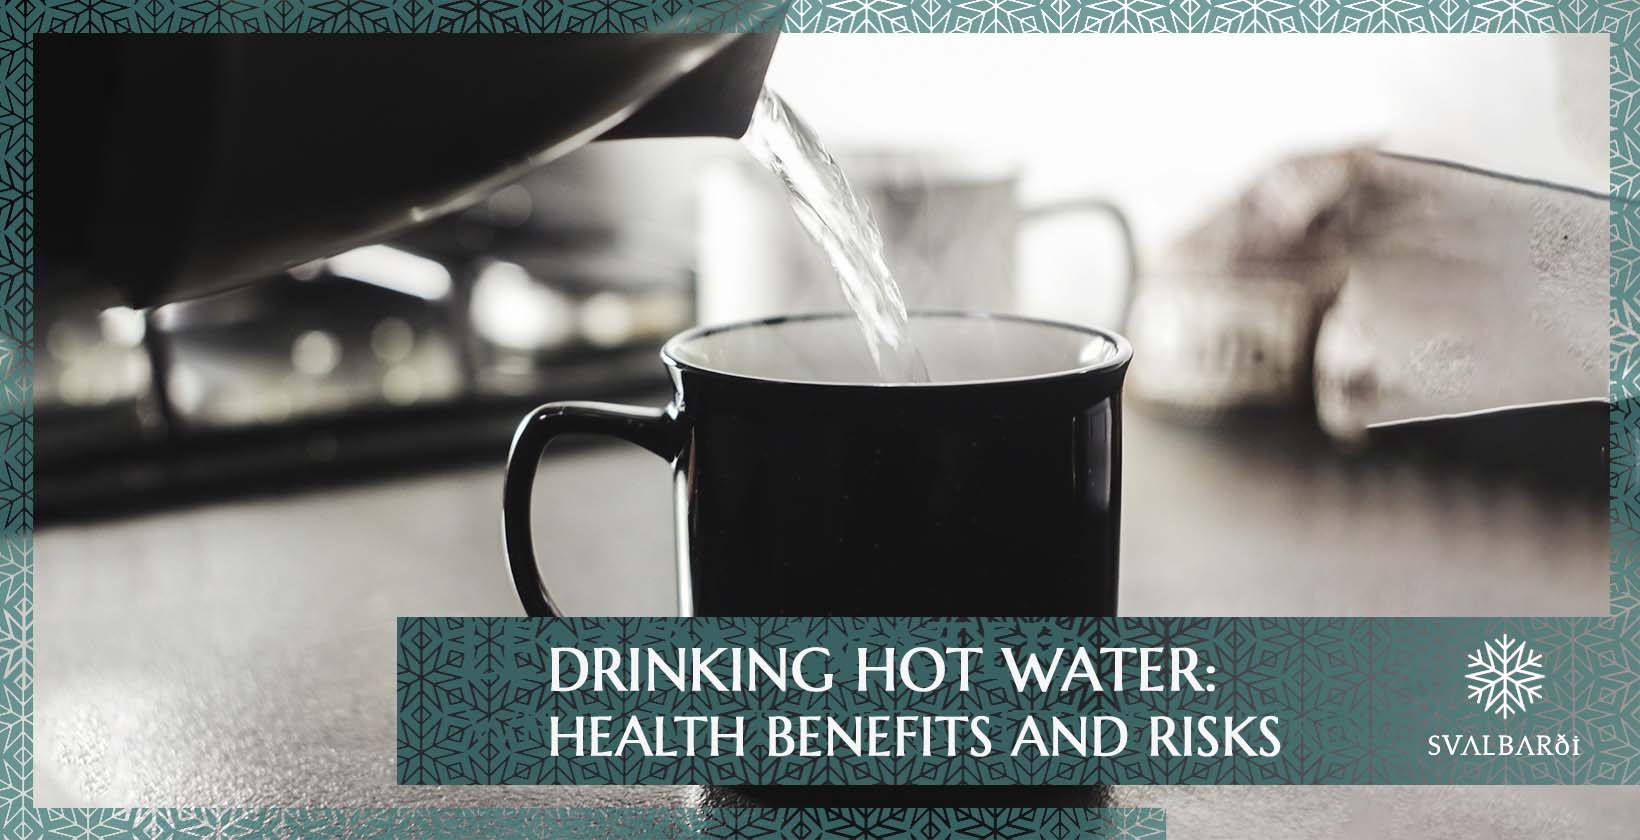 5 benefits of drinking hot water and why overdoing it may be bad